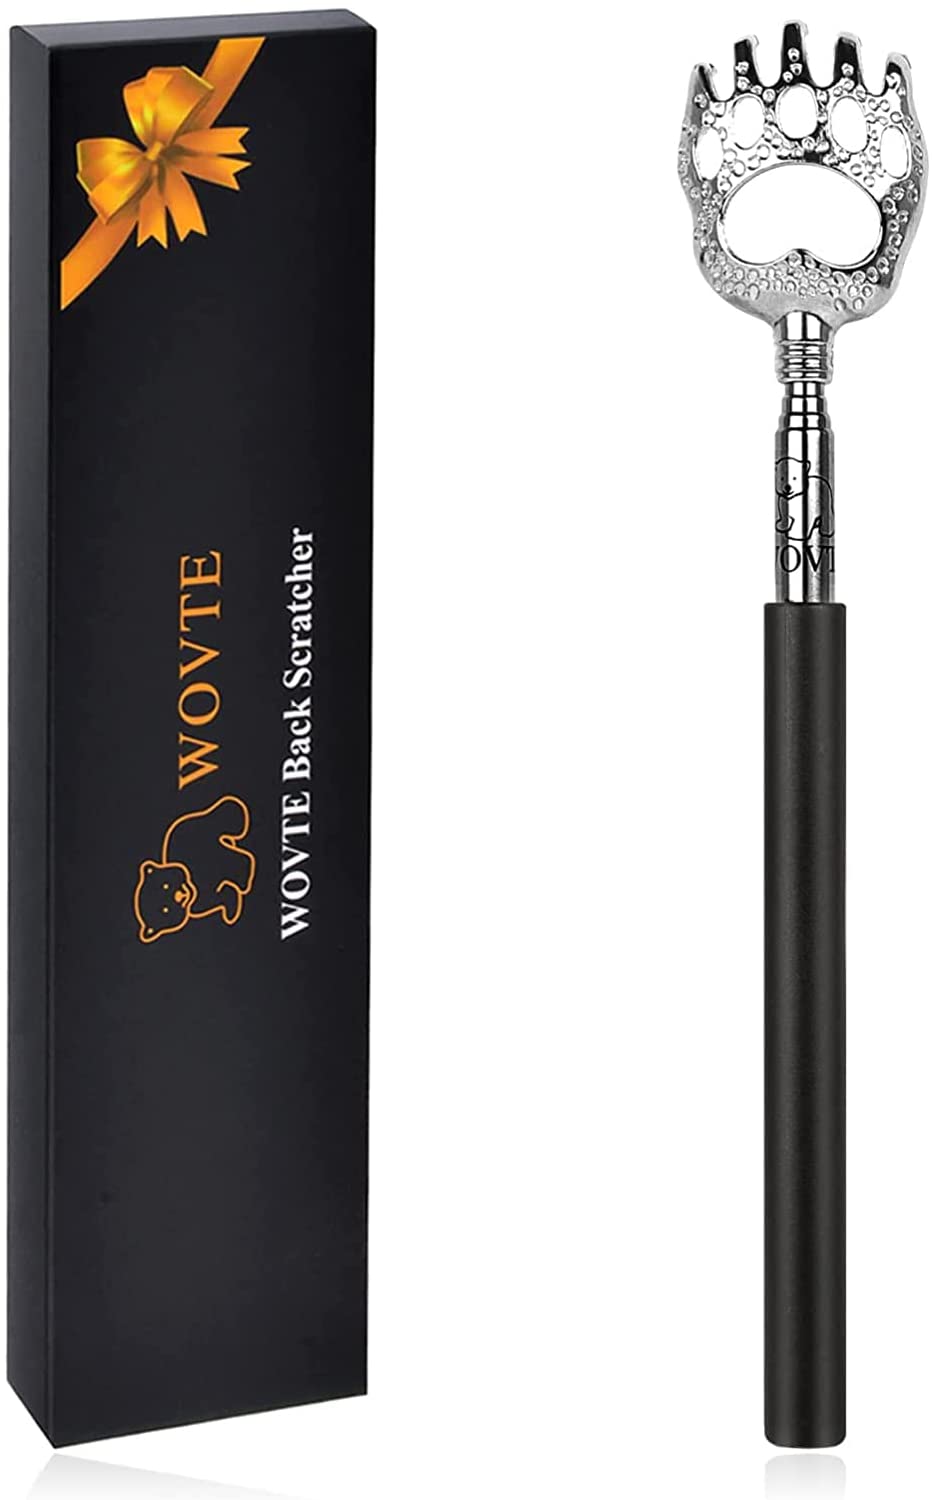 Wovete Stainless Steel Back Scratcher